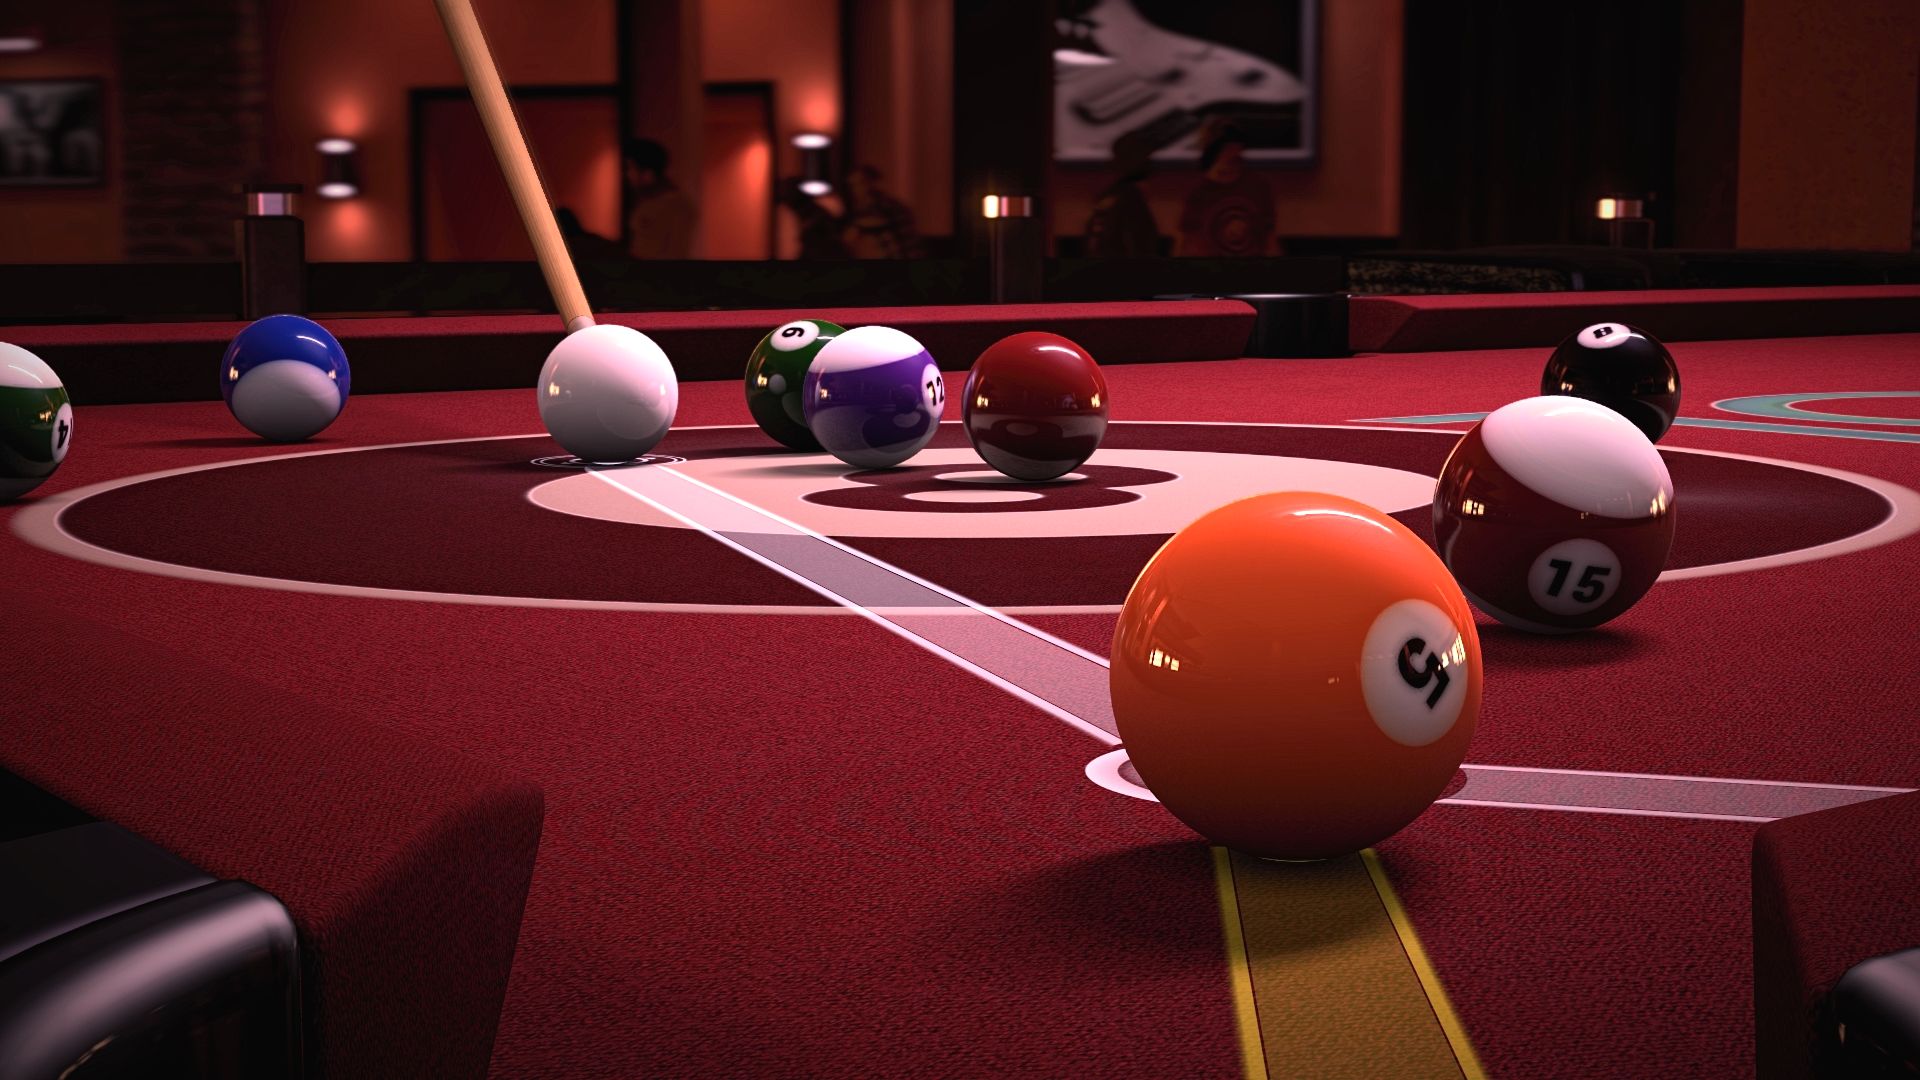 THE CRAZIEST 8 BALL POOL BREAK YOU WILL EVER SEE (you'll be shocked) 